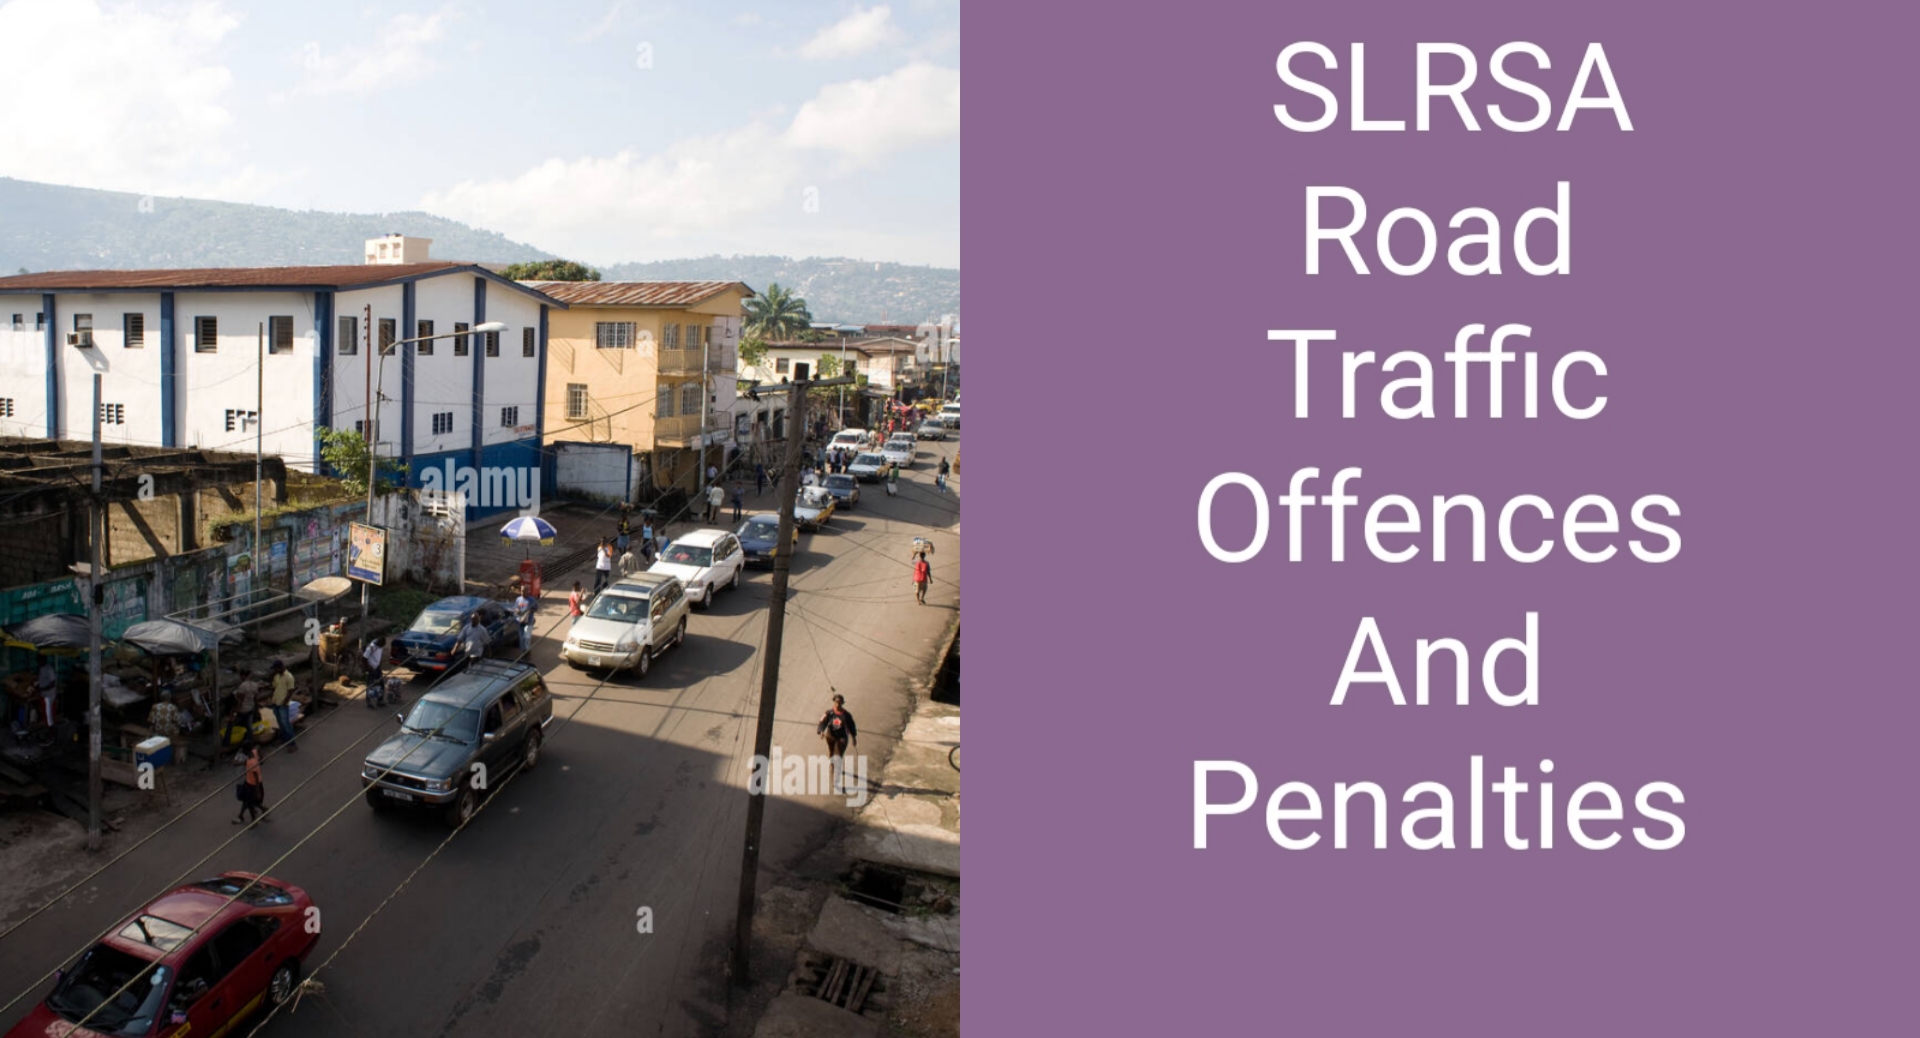 SLRSA: Checkout Road Traffic Offences And Penalties